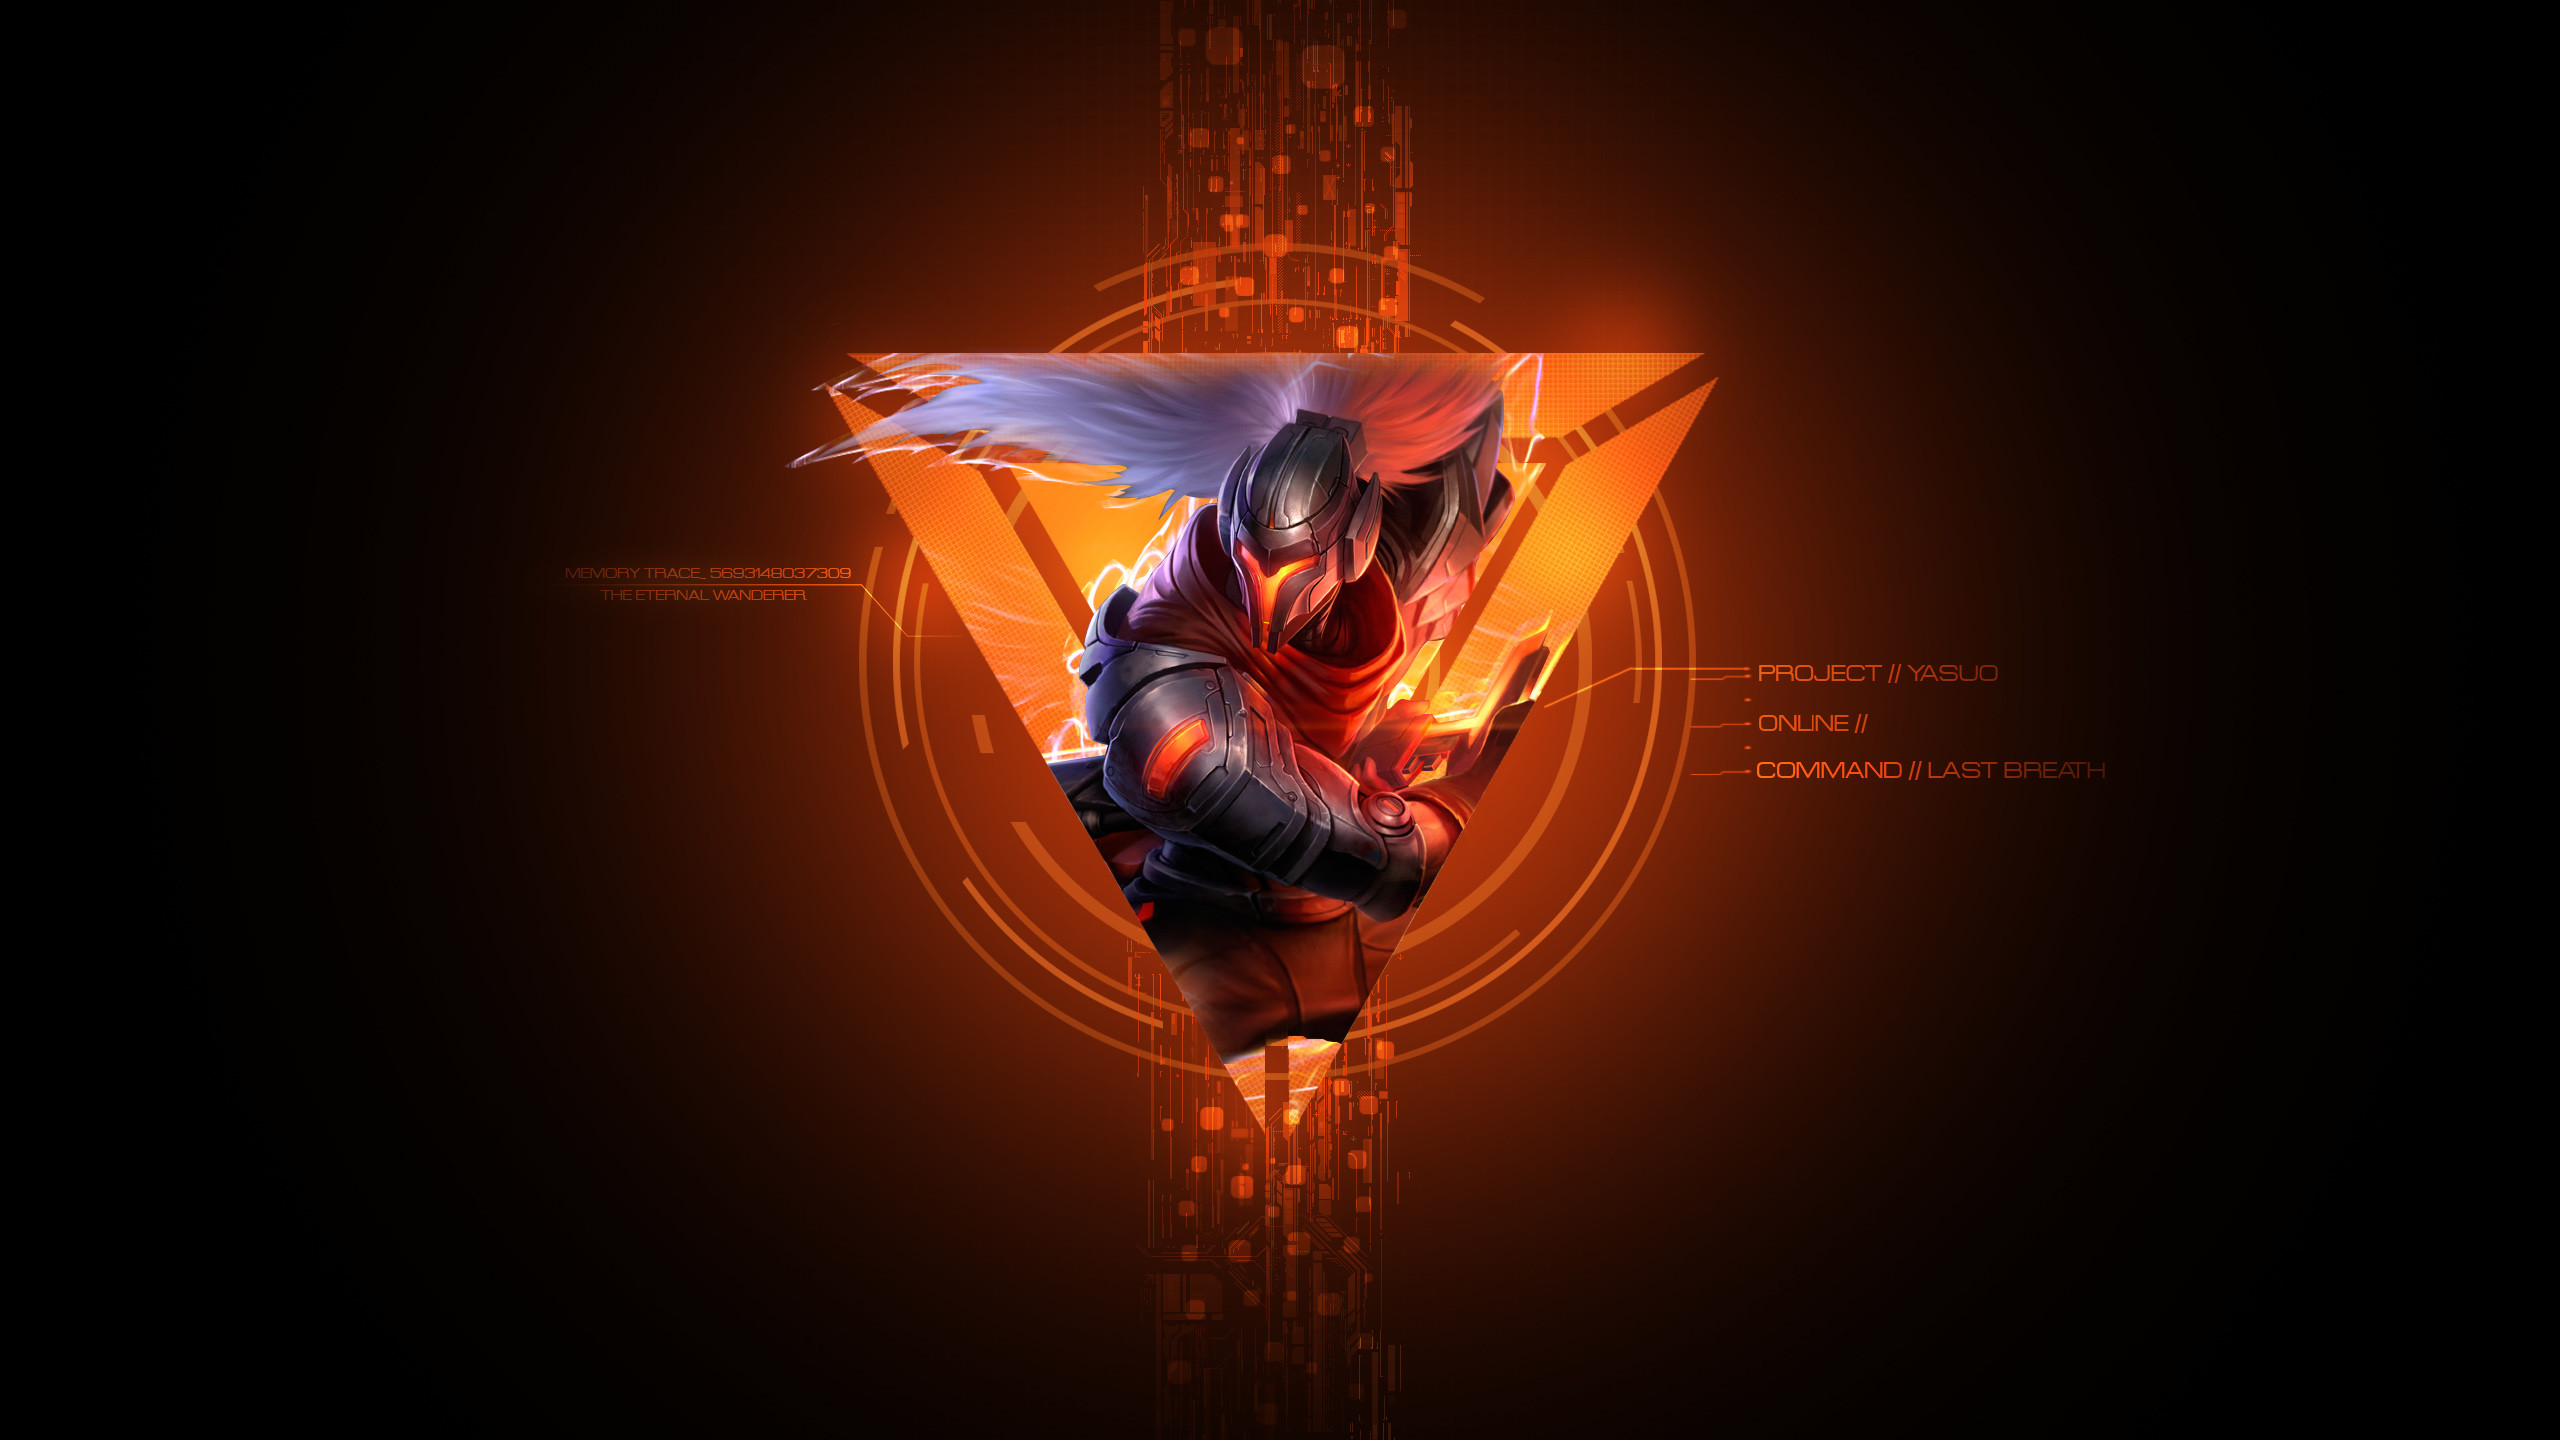 Project Yasuo Wallpaper HD 82 images